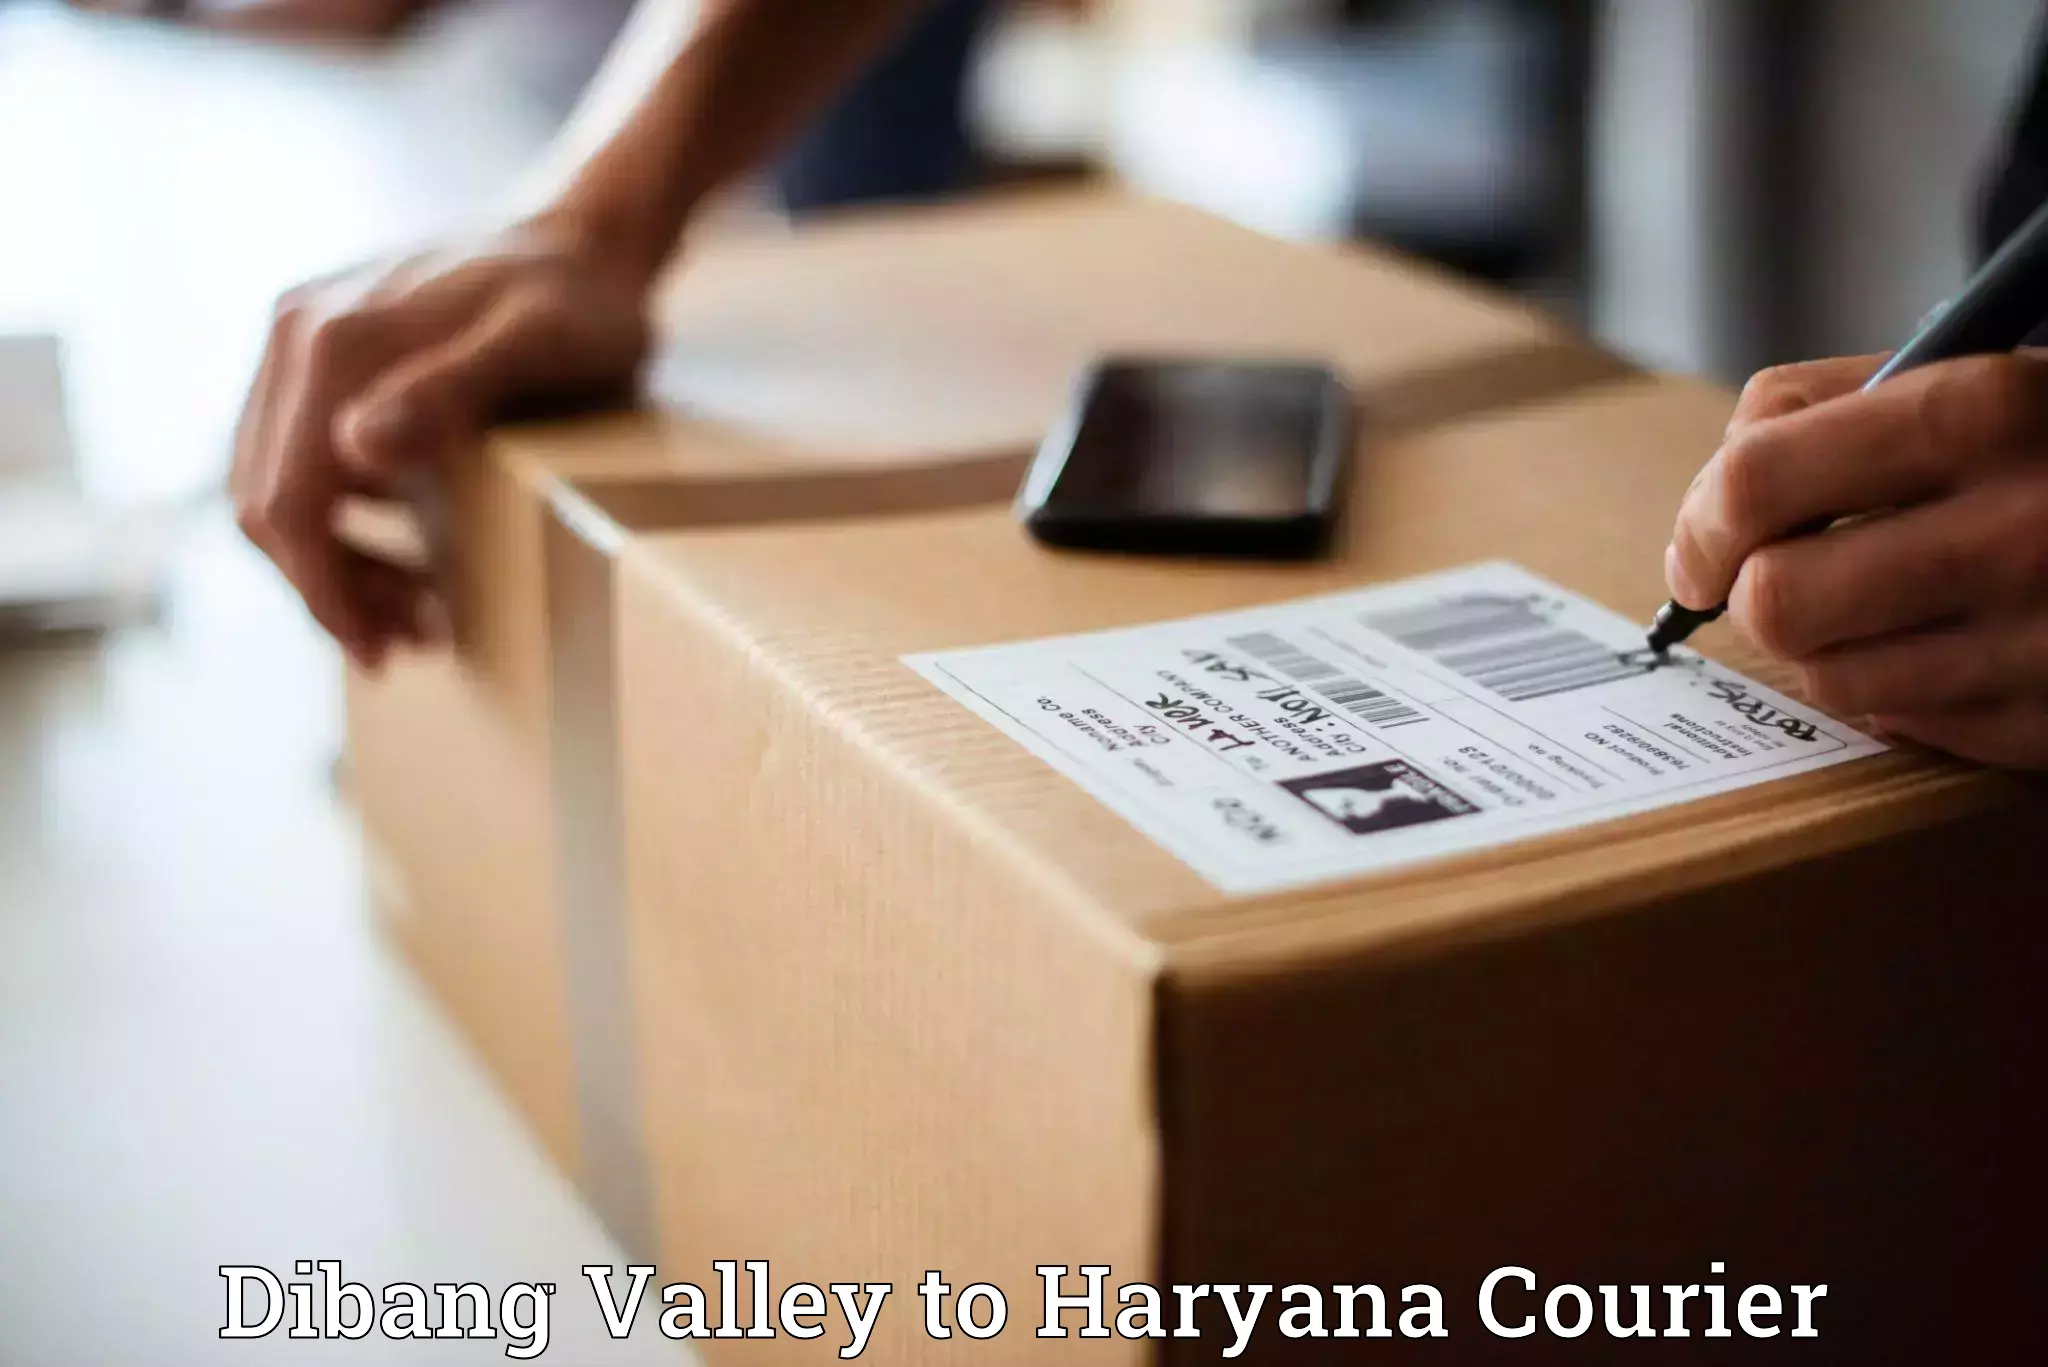 Expedited parcel delivery in Dibang Valley to Bilaspur Haryana